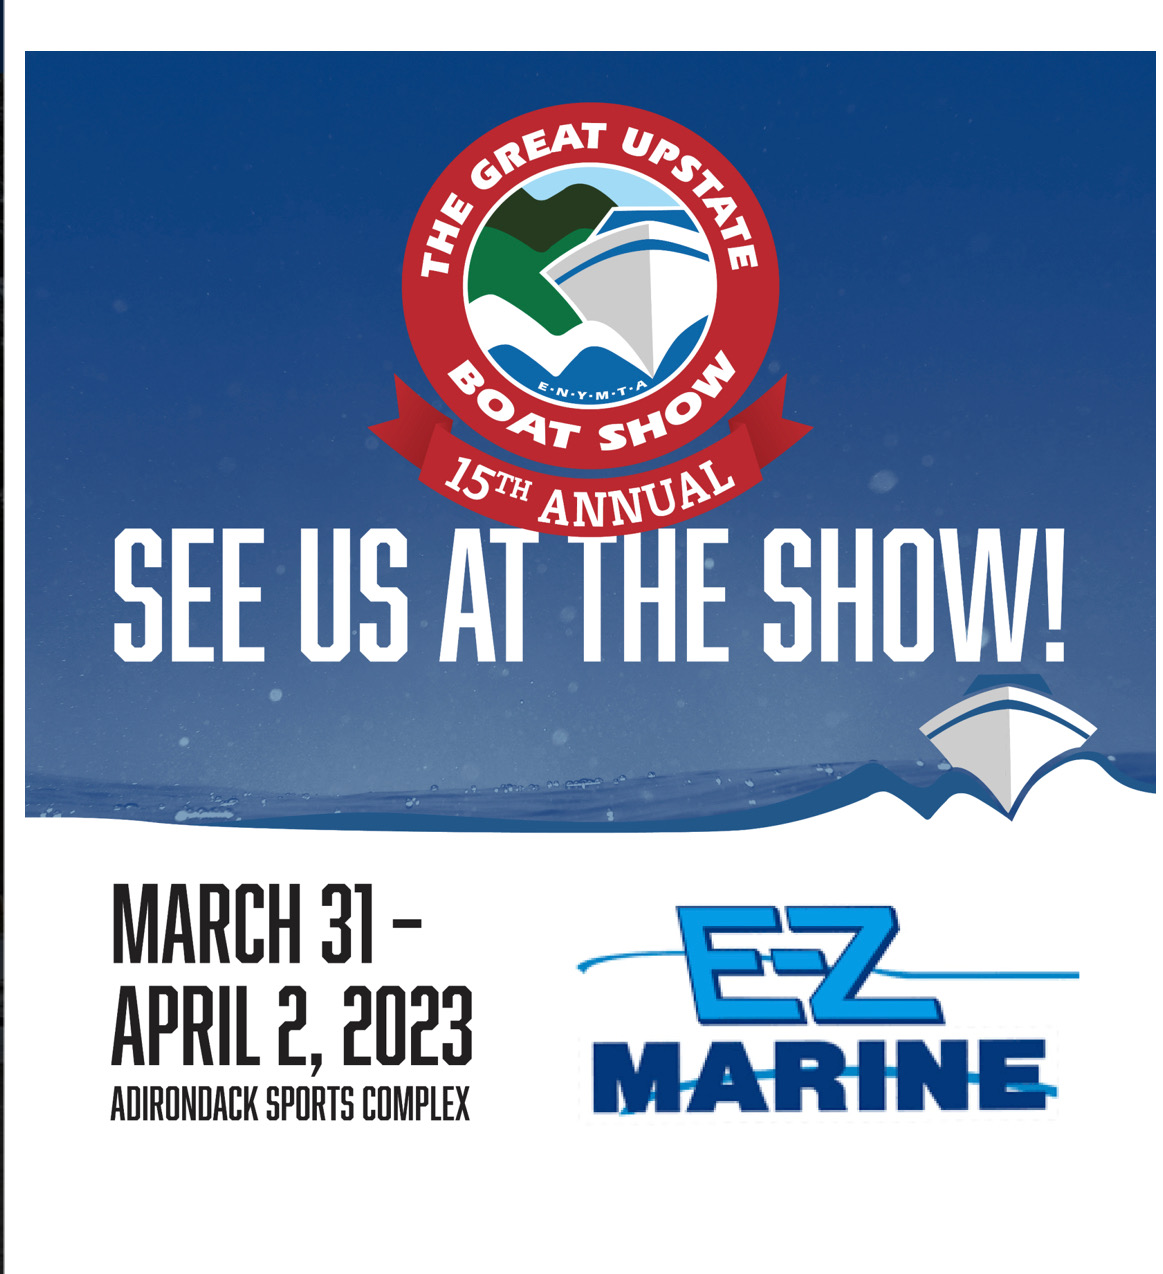 The Great Upstate Boat Show 